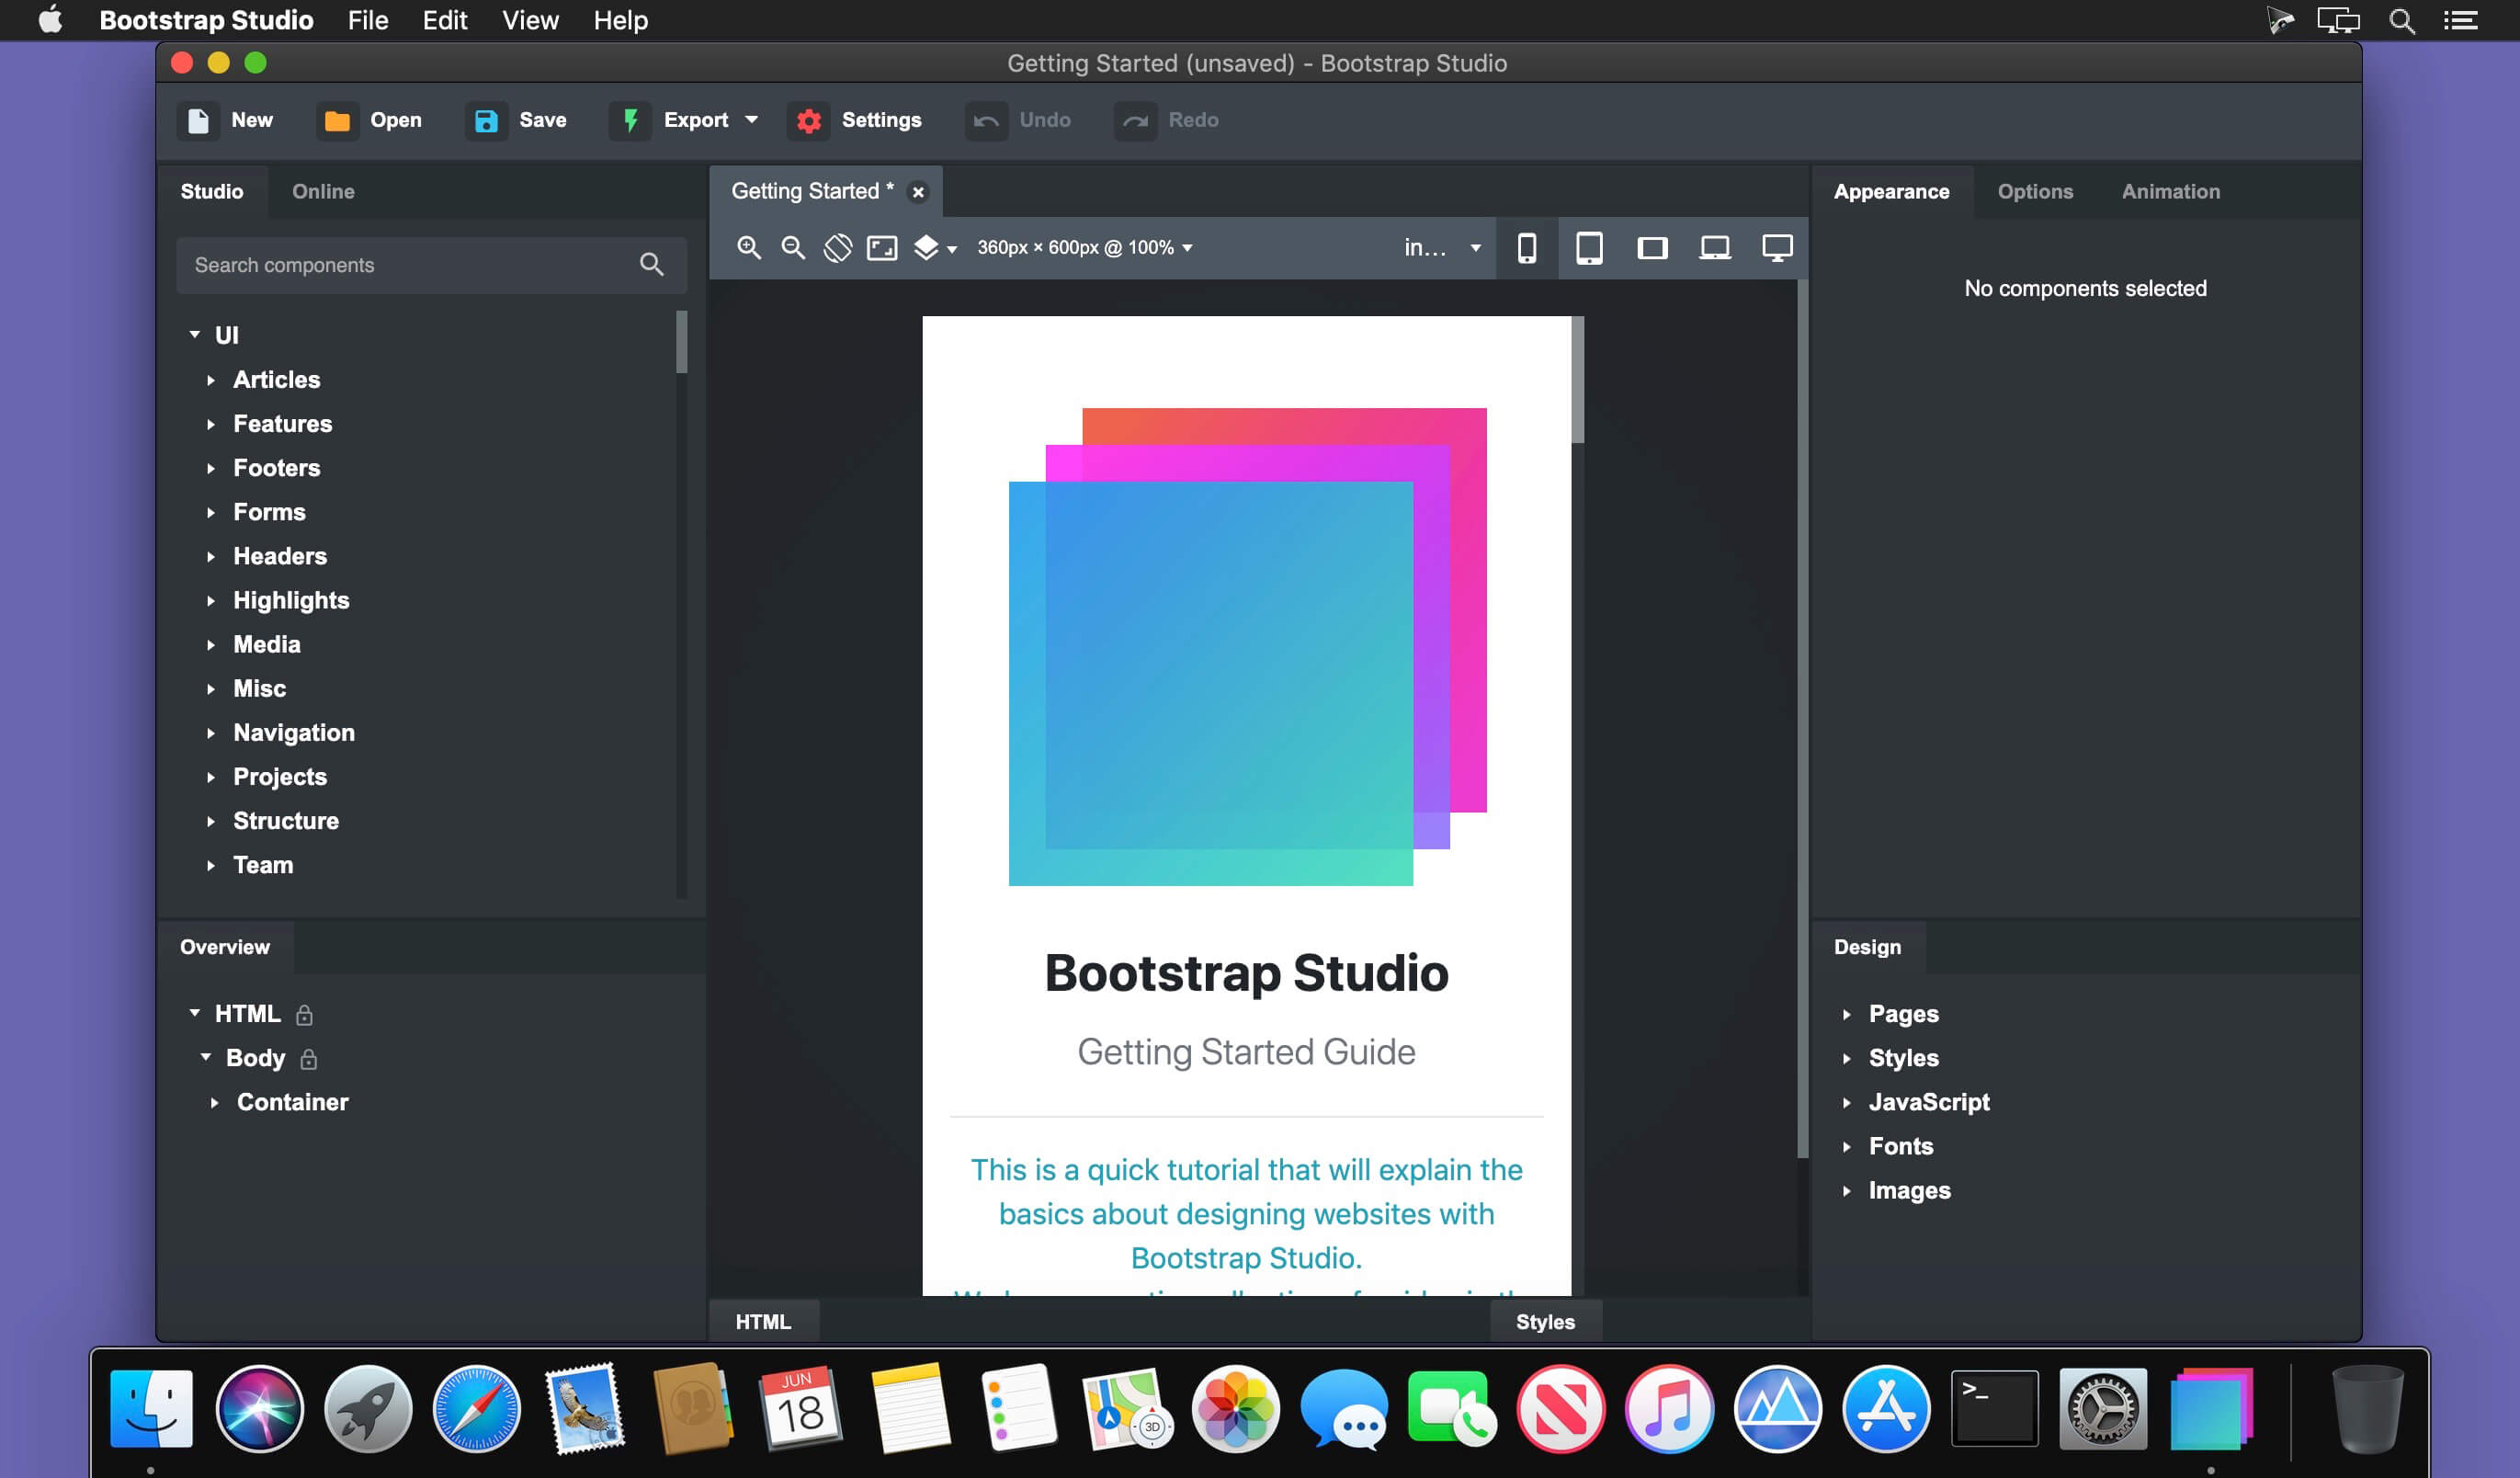 download the last version for iphoneBootstrap Studio 6.4.2